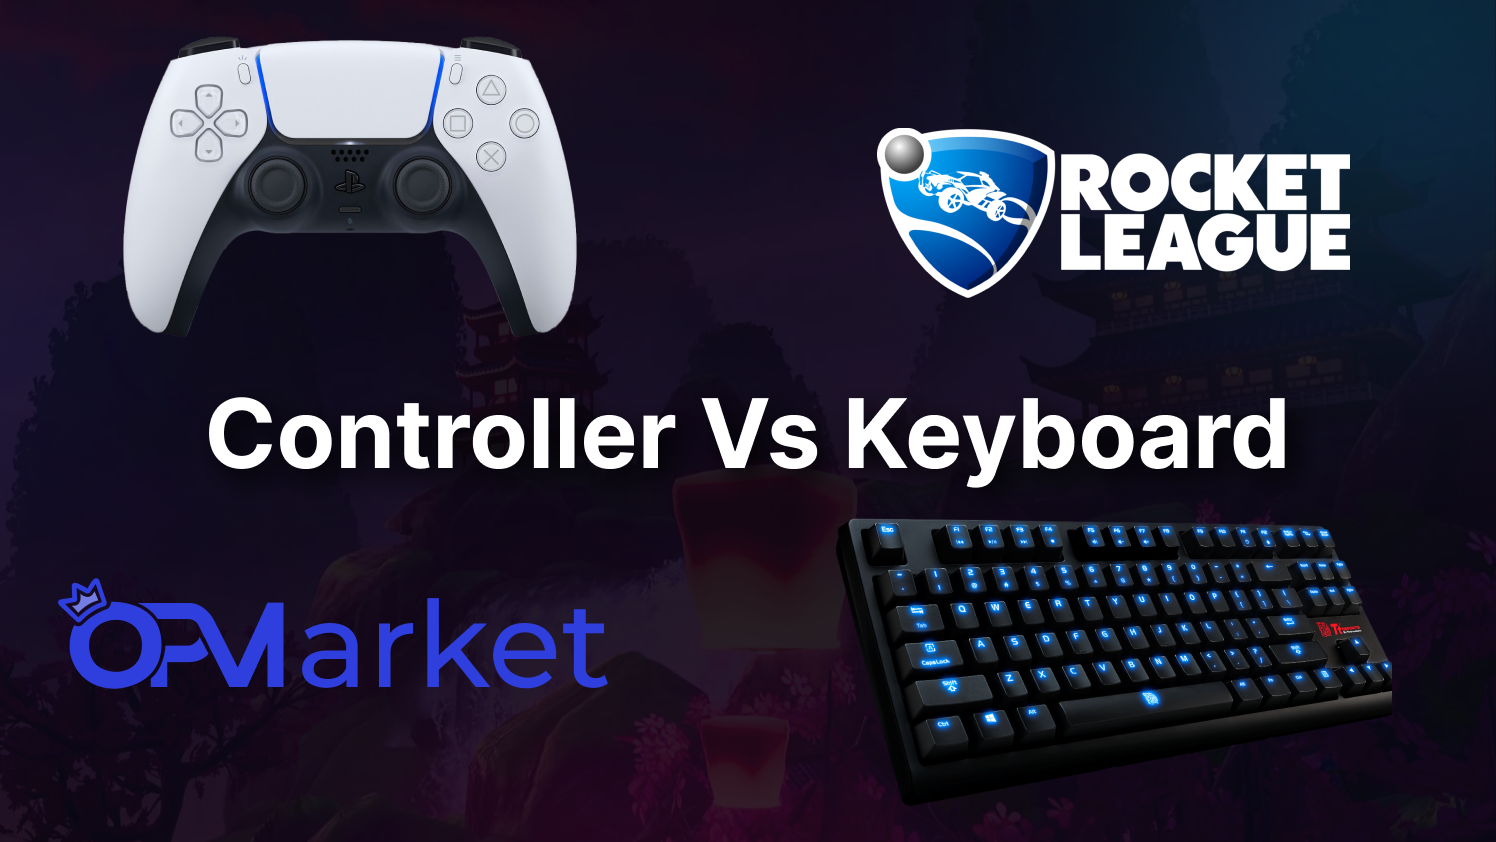 Should You Play With Controller Or Keyboard In Rocket League?